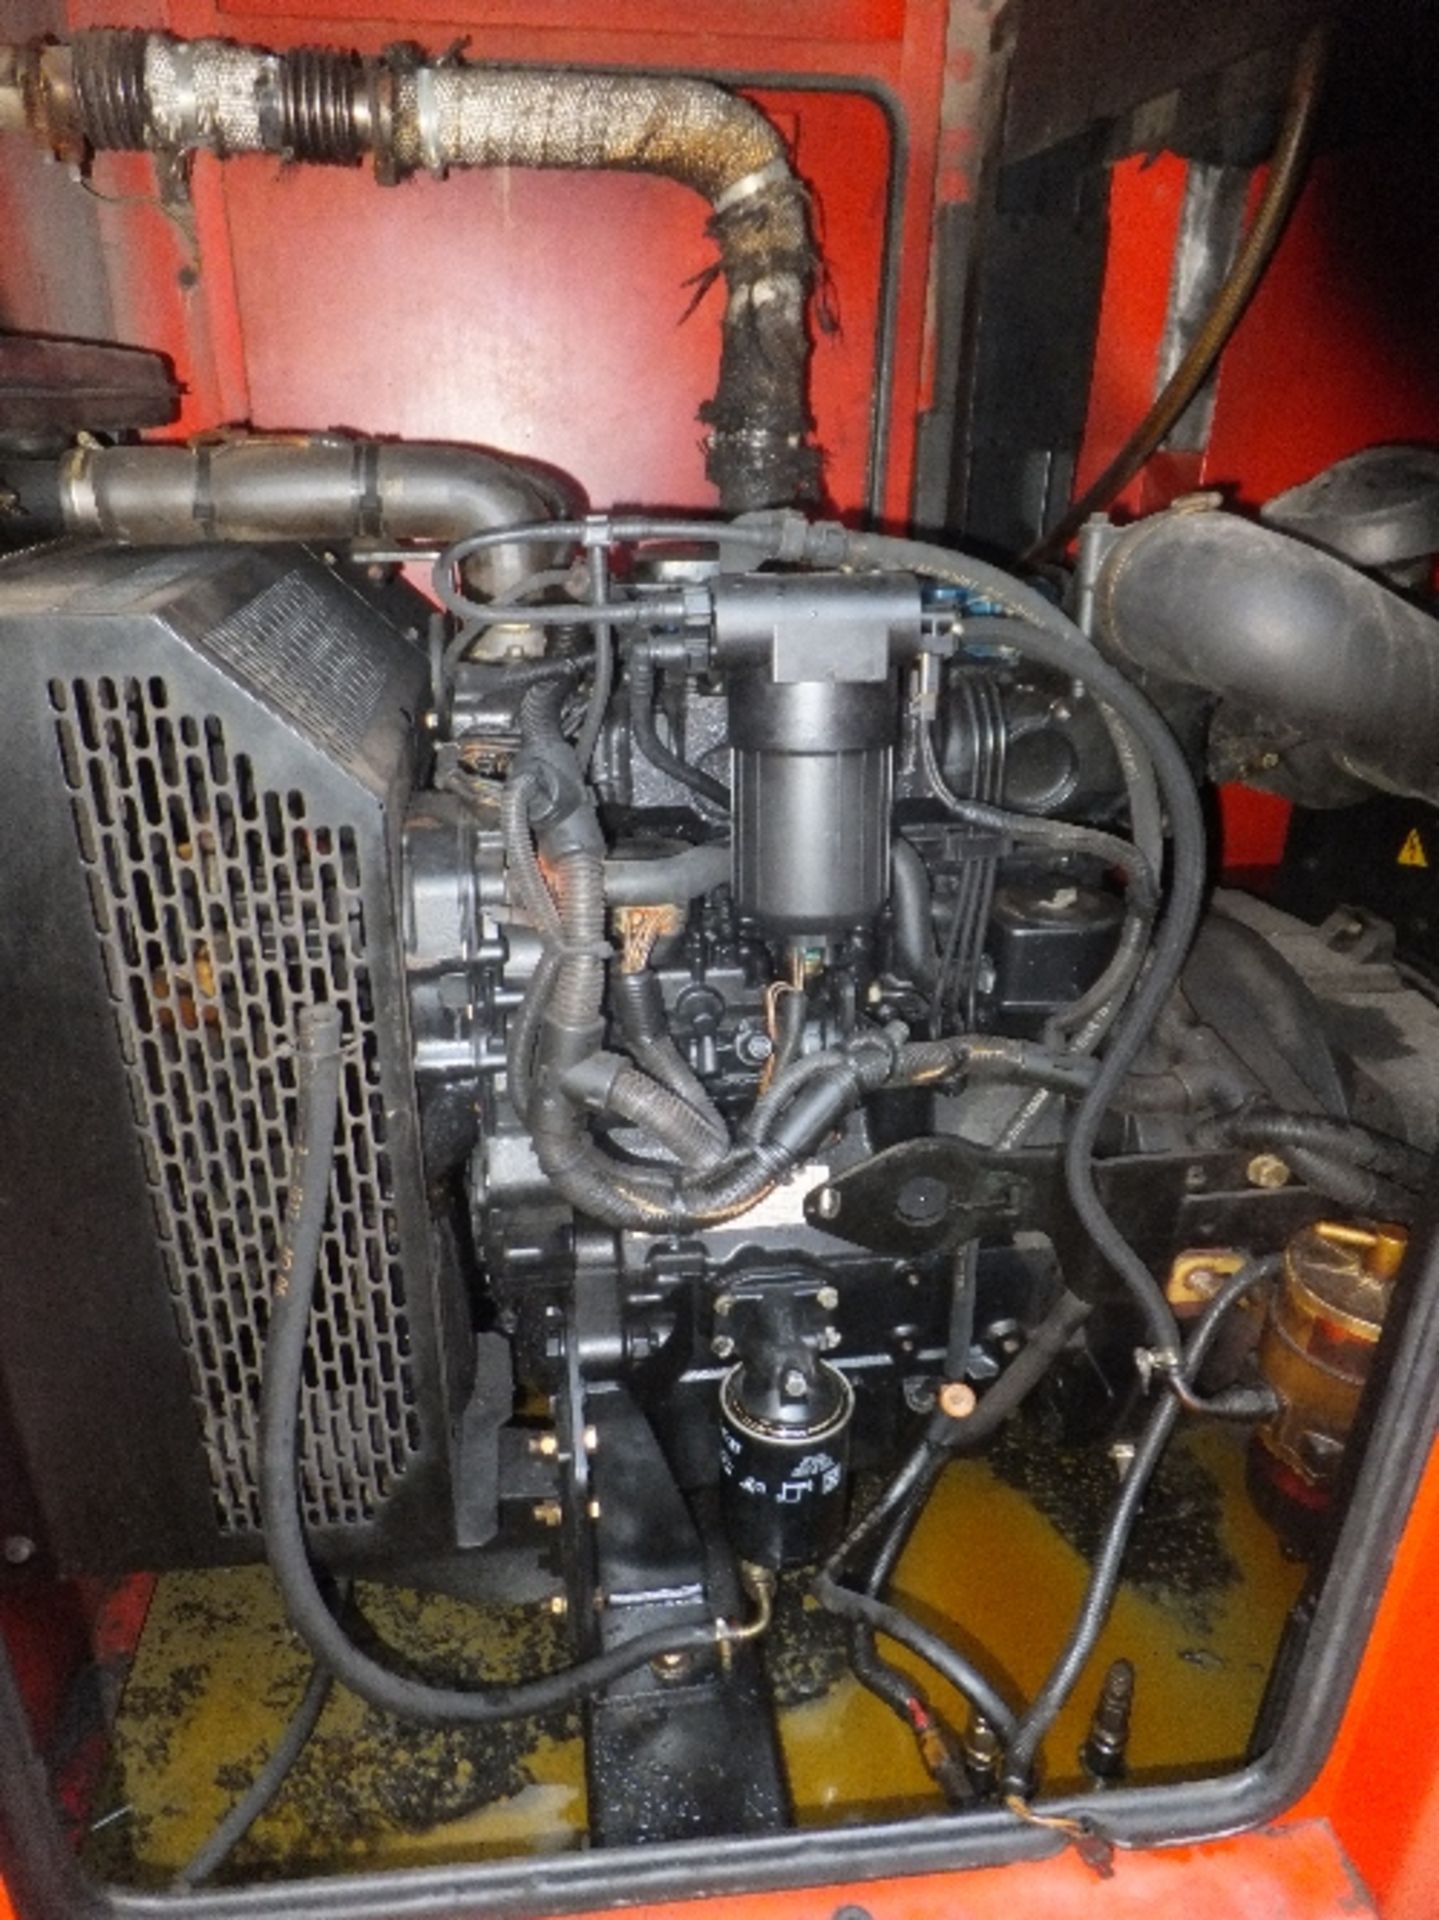 FG Wilson 30kva generator 42095hrs This lot is sold on behalf of Speedy - Image 2 of 6